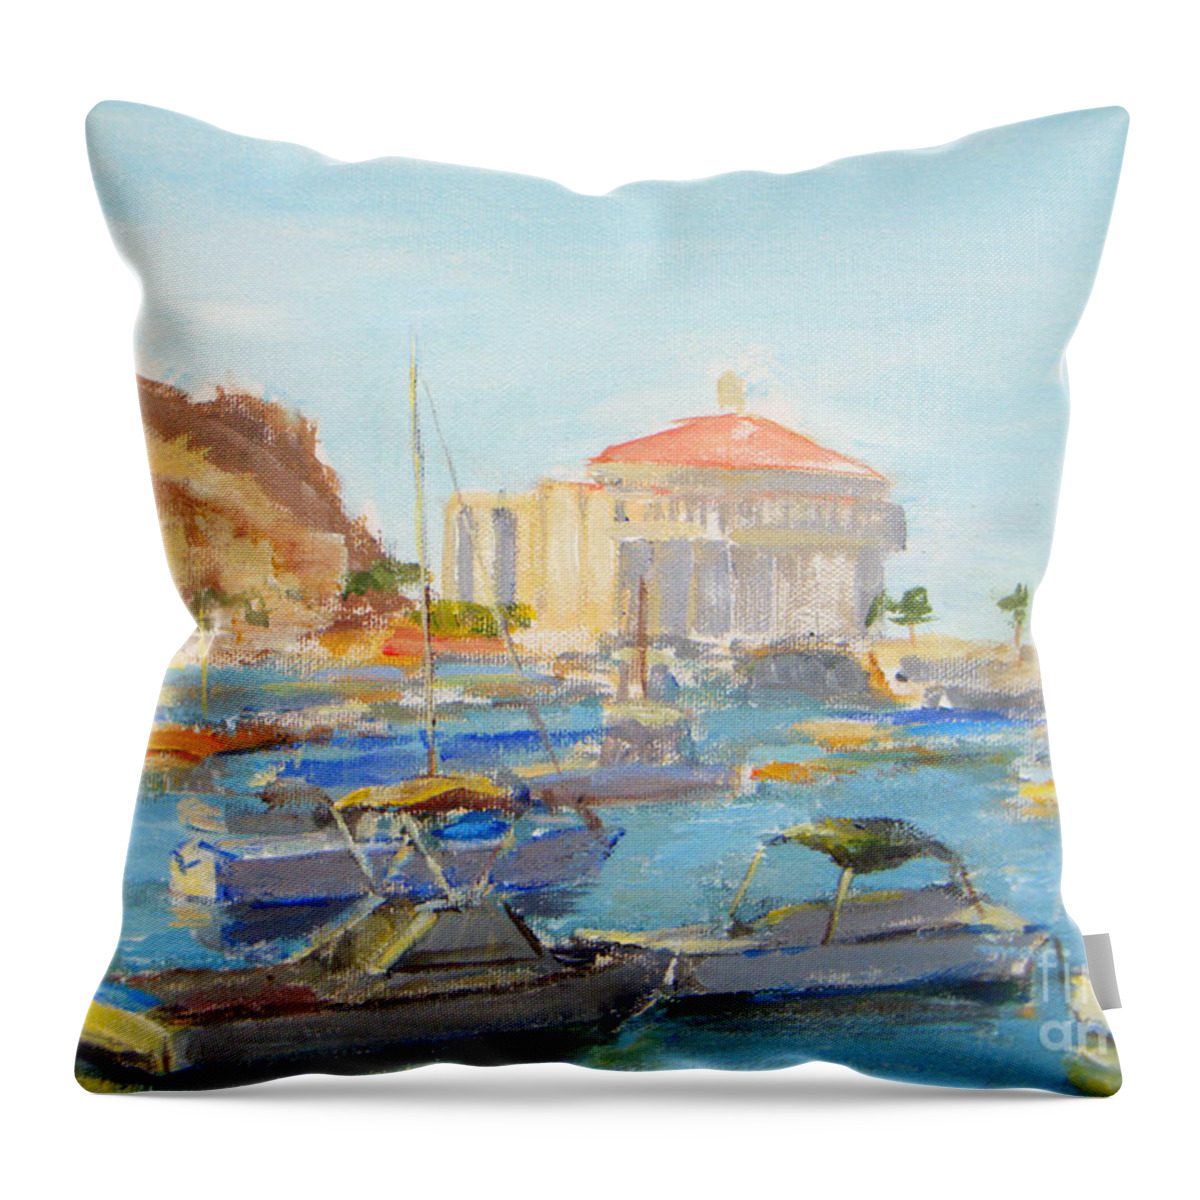 Catalina Throw Pillow featuring the painting Catalina Casino In The Light by Joan Coffey